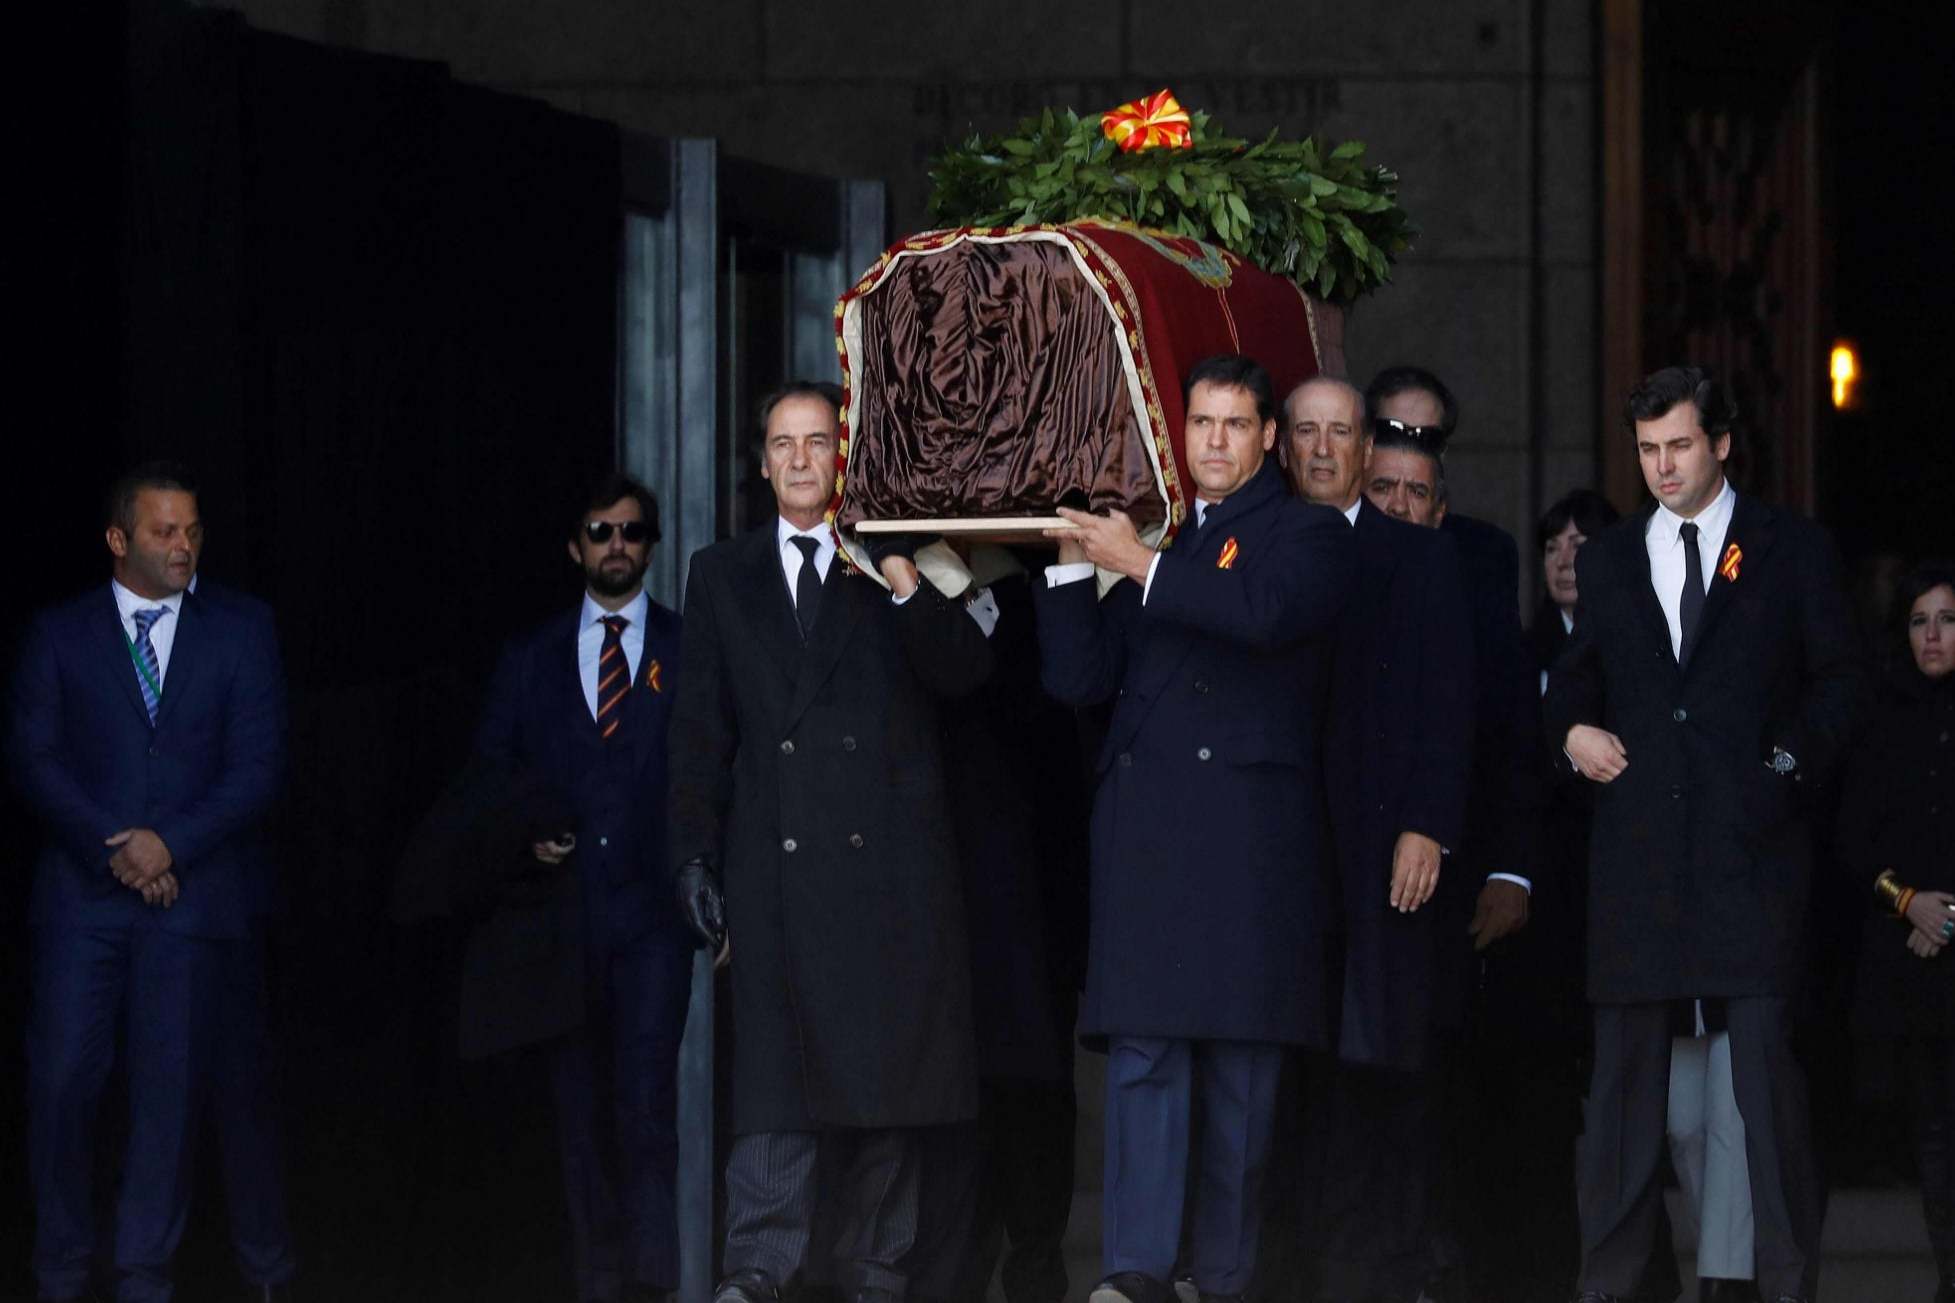 Family members carry the coffin of Spanish dictator Francisco Franco out of the Valley of the Fallen mausoleum